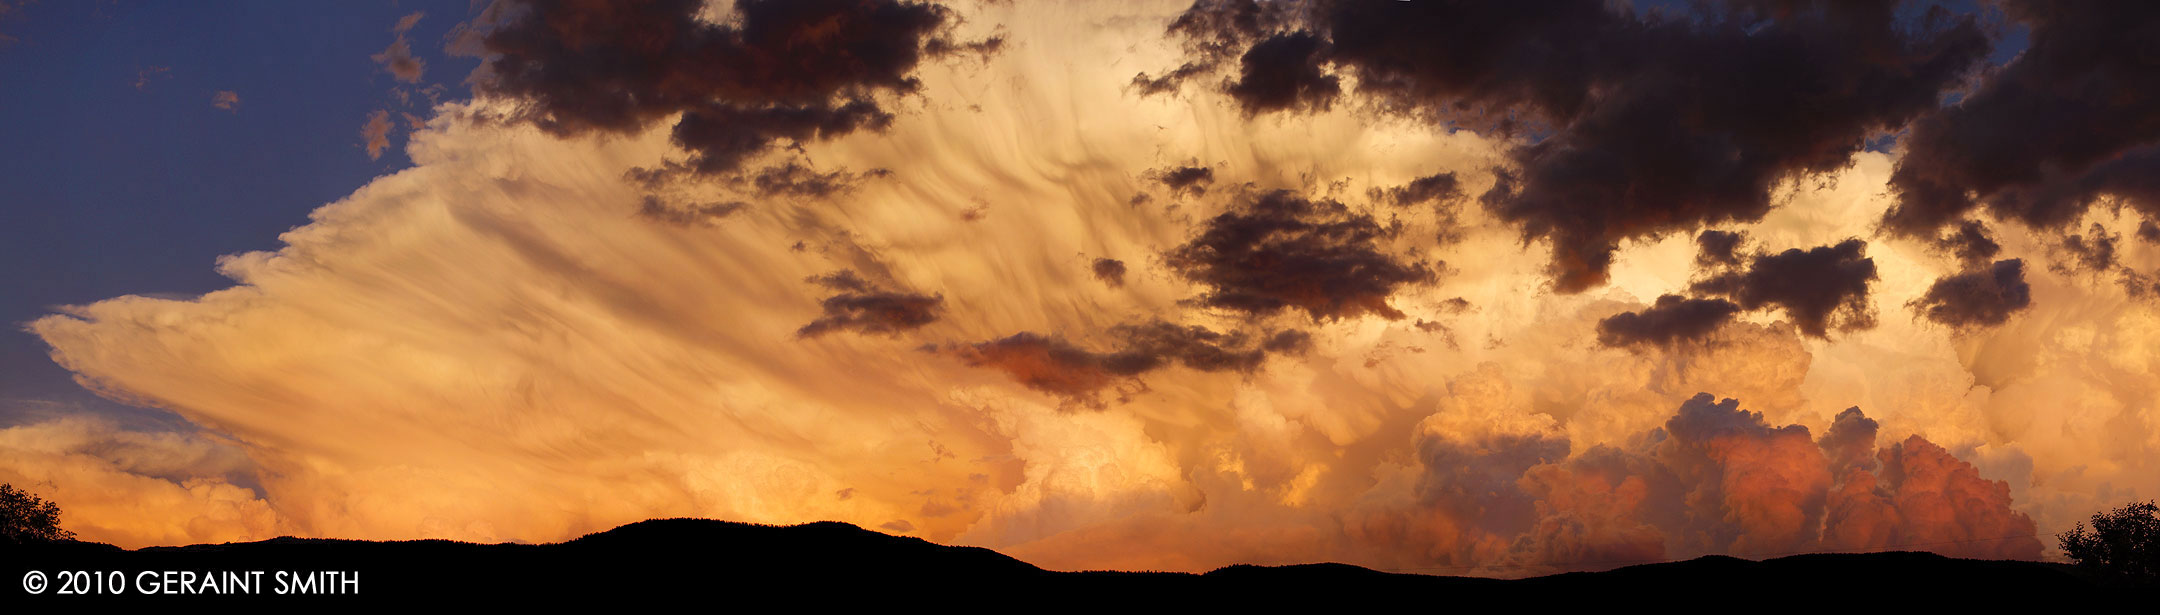 Clouds in the evening sky over Taos, New Mexico